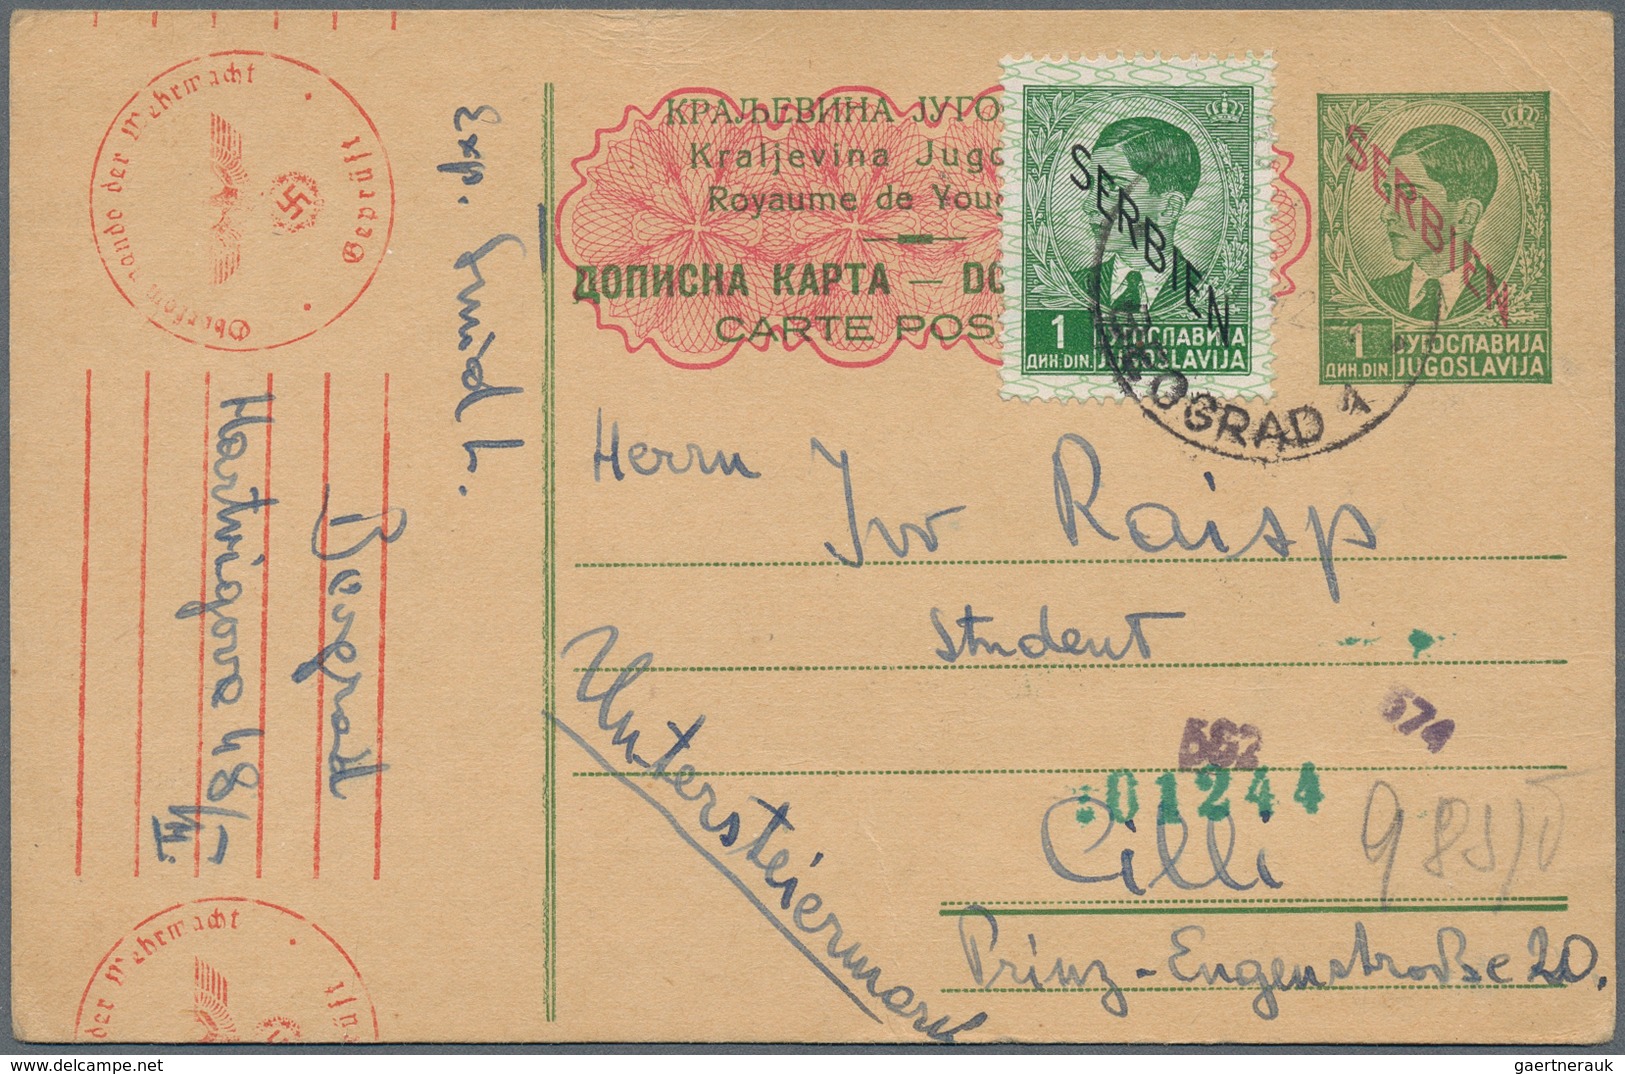 Dt. Besetzung II WK - Serbien - Ganzsachen: 1941/1943, Lot Of Five Commercially Used Stationery Card - Bezetting 1938-45